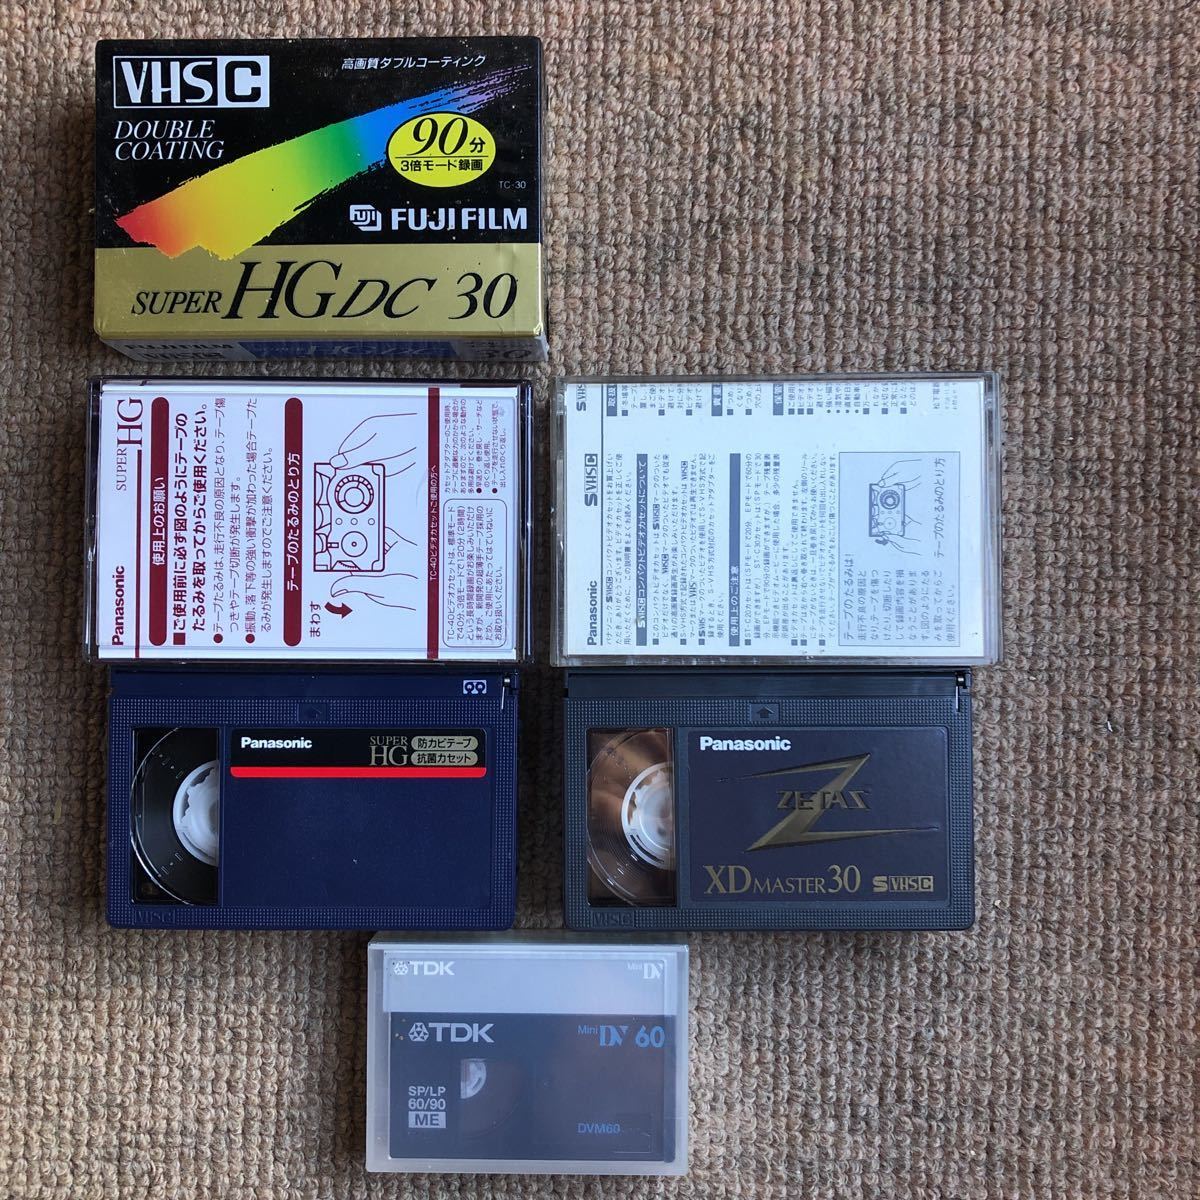  former times video camera. tape VHS C( unopened Fuji film 30 minute. breaking the seal 40 minute?) SVHS C breaking the seal 30 minute.Mini DV60(TDK unopened ).VHS-C adaptor 